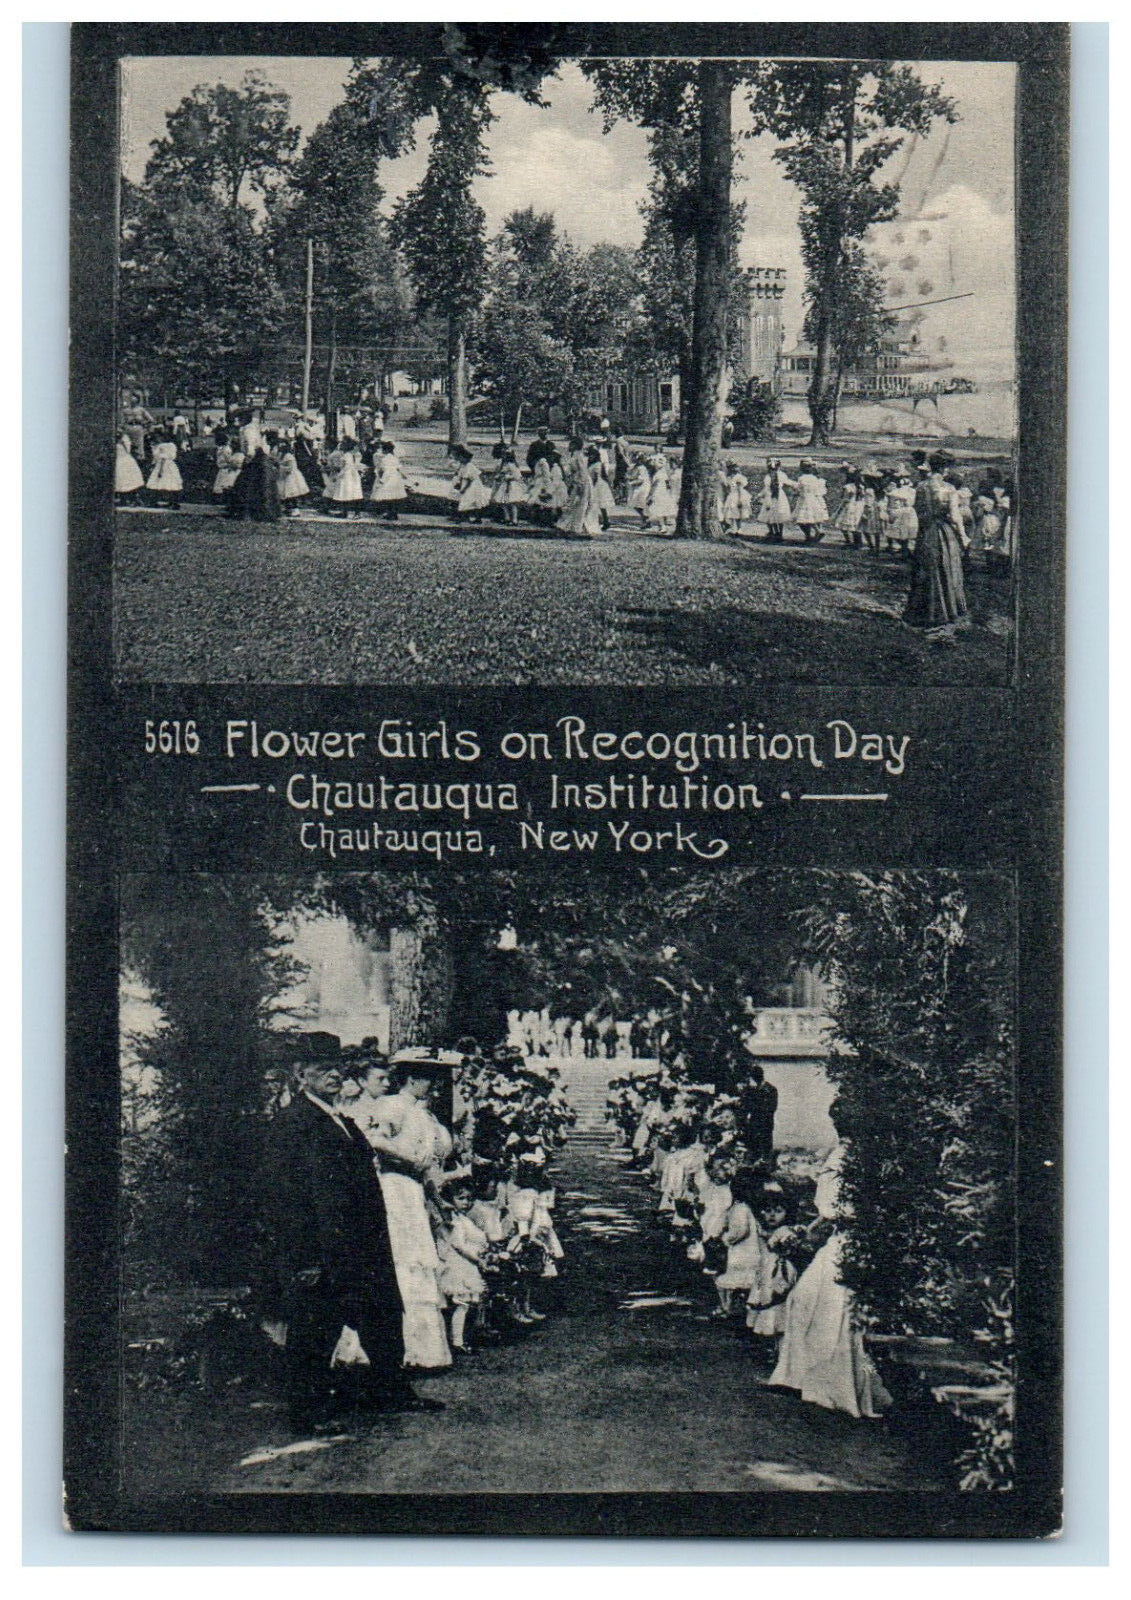 1908 Flower Girls on Recognition Day Chautauqua Institution New York NY Postcard